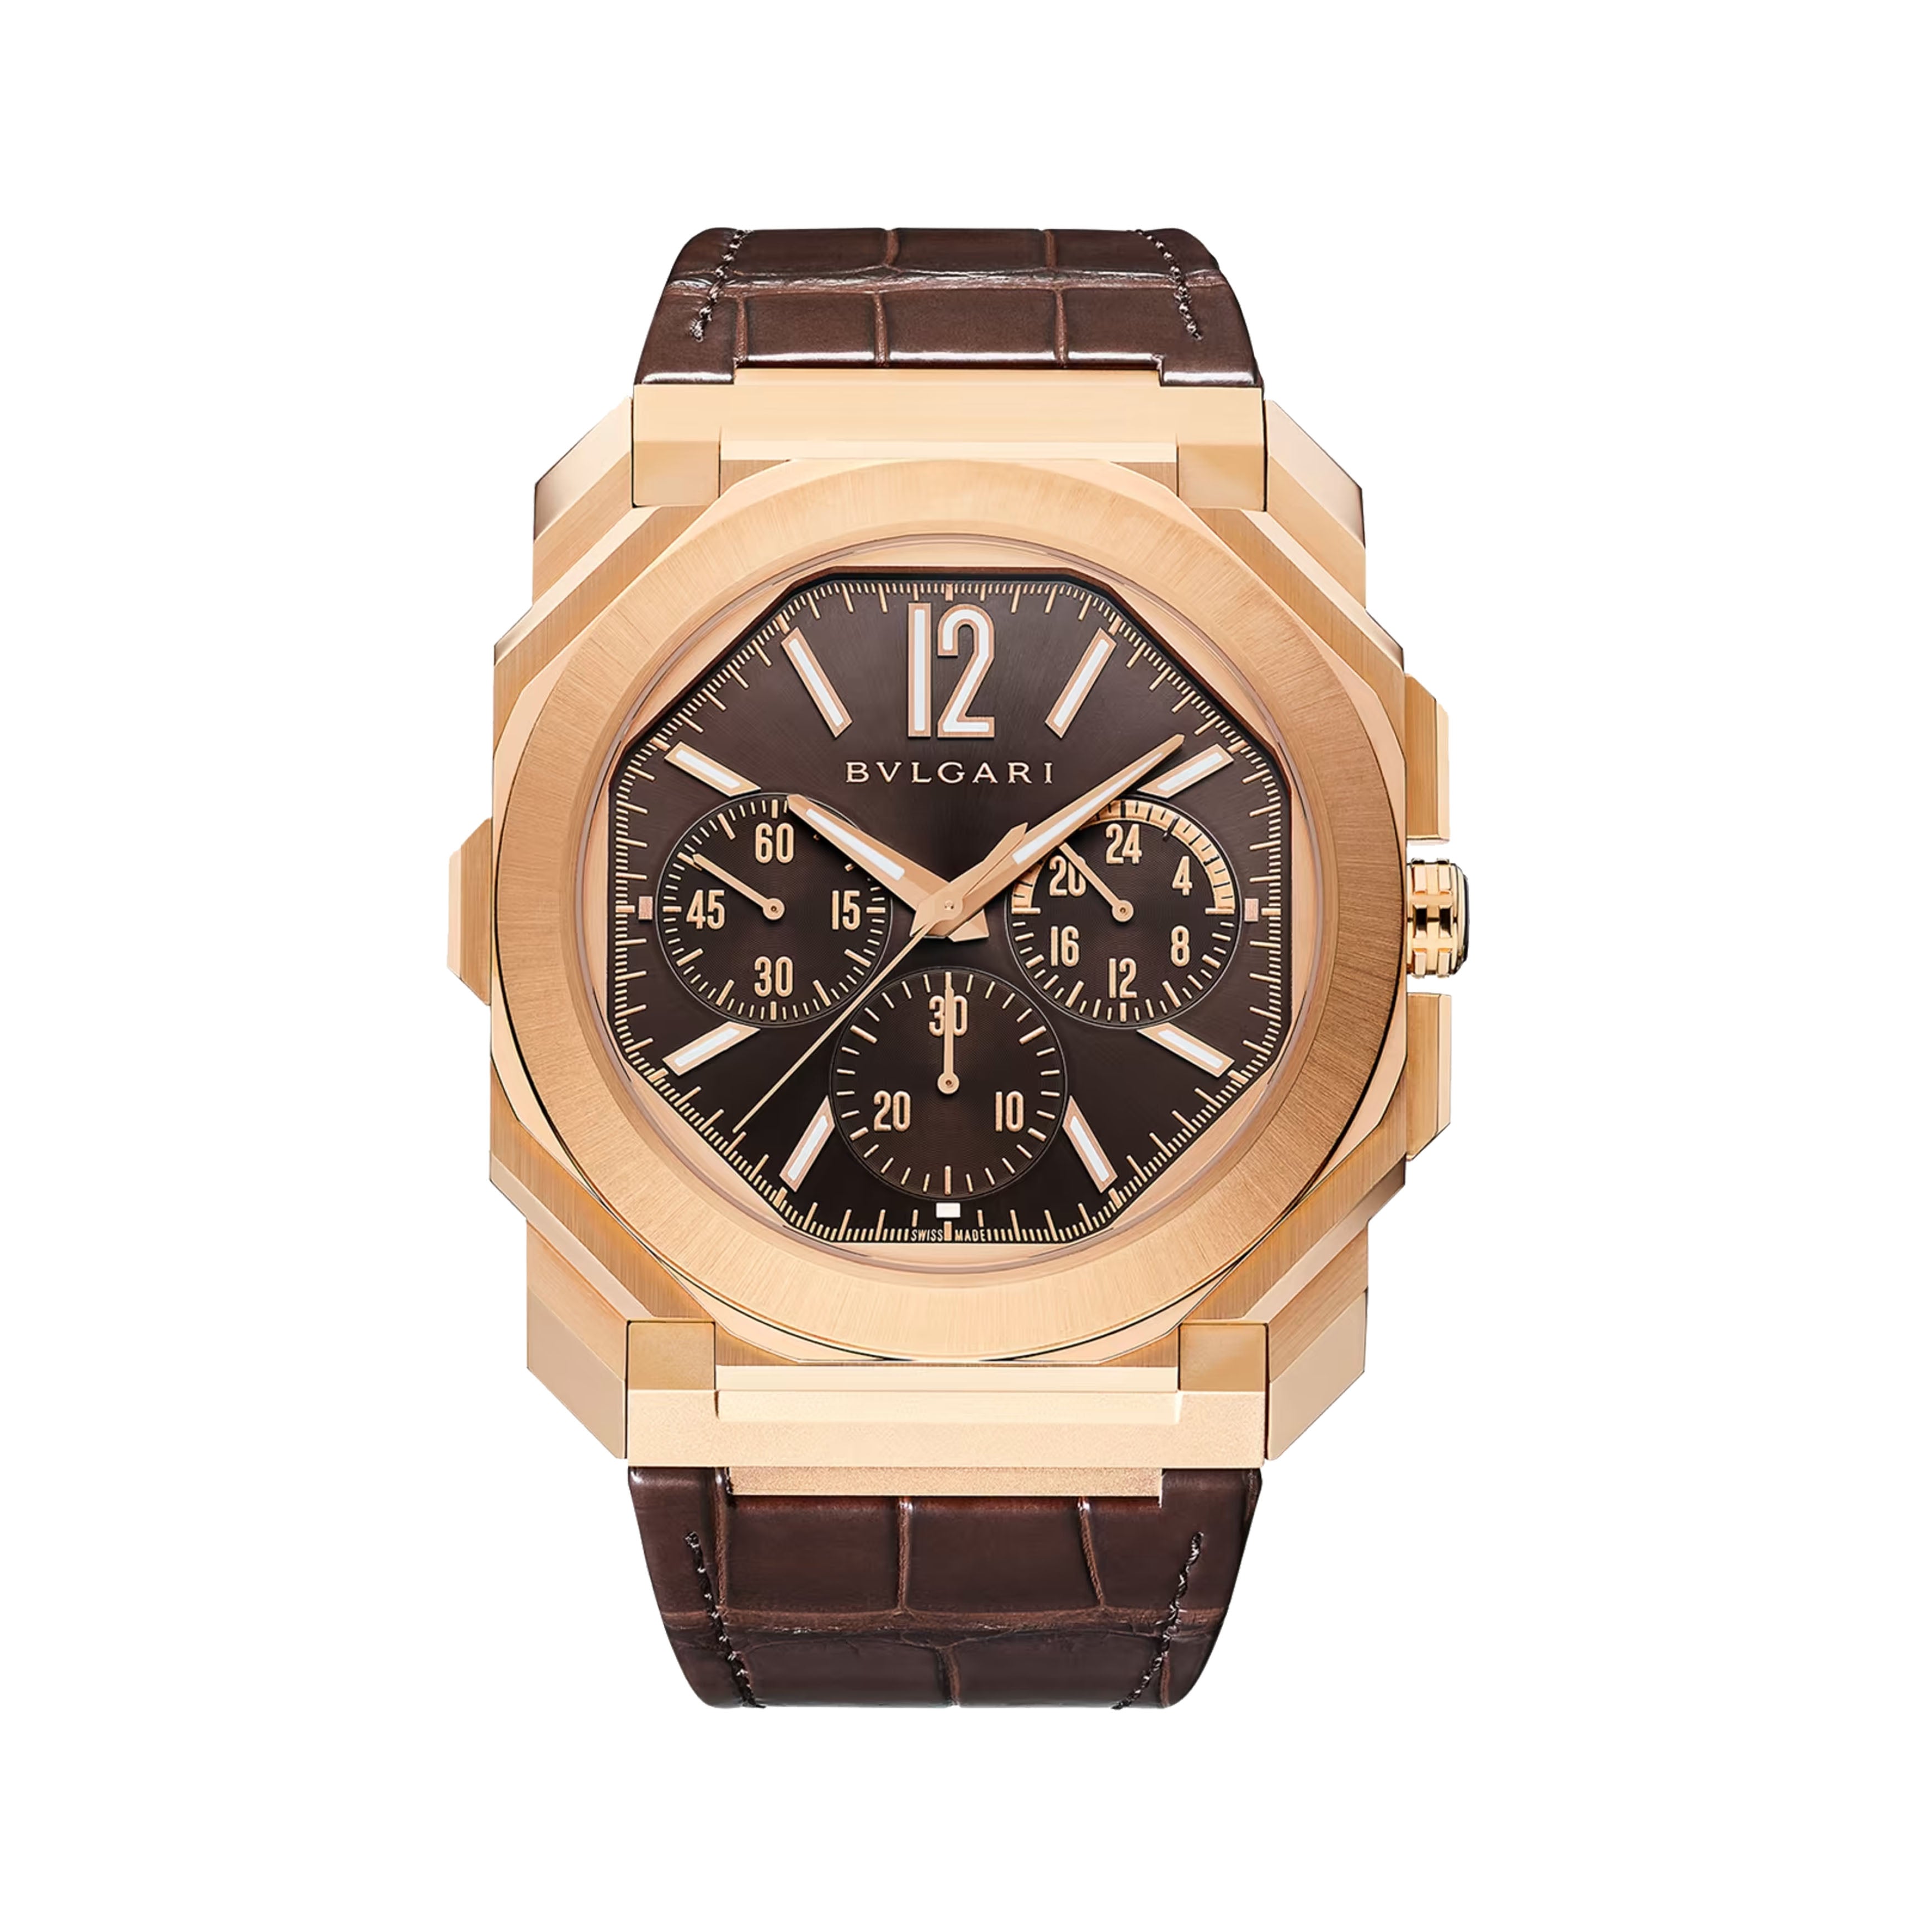 Bulgari Octo Finissimo Watch, 43mm Brown Dial, 103468